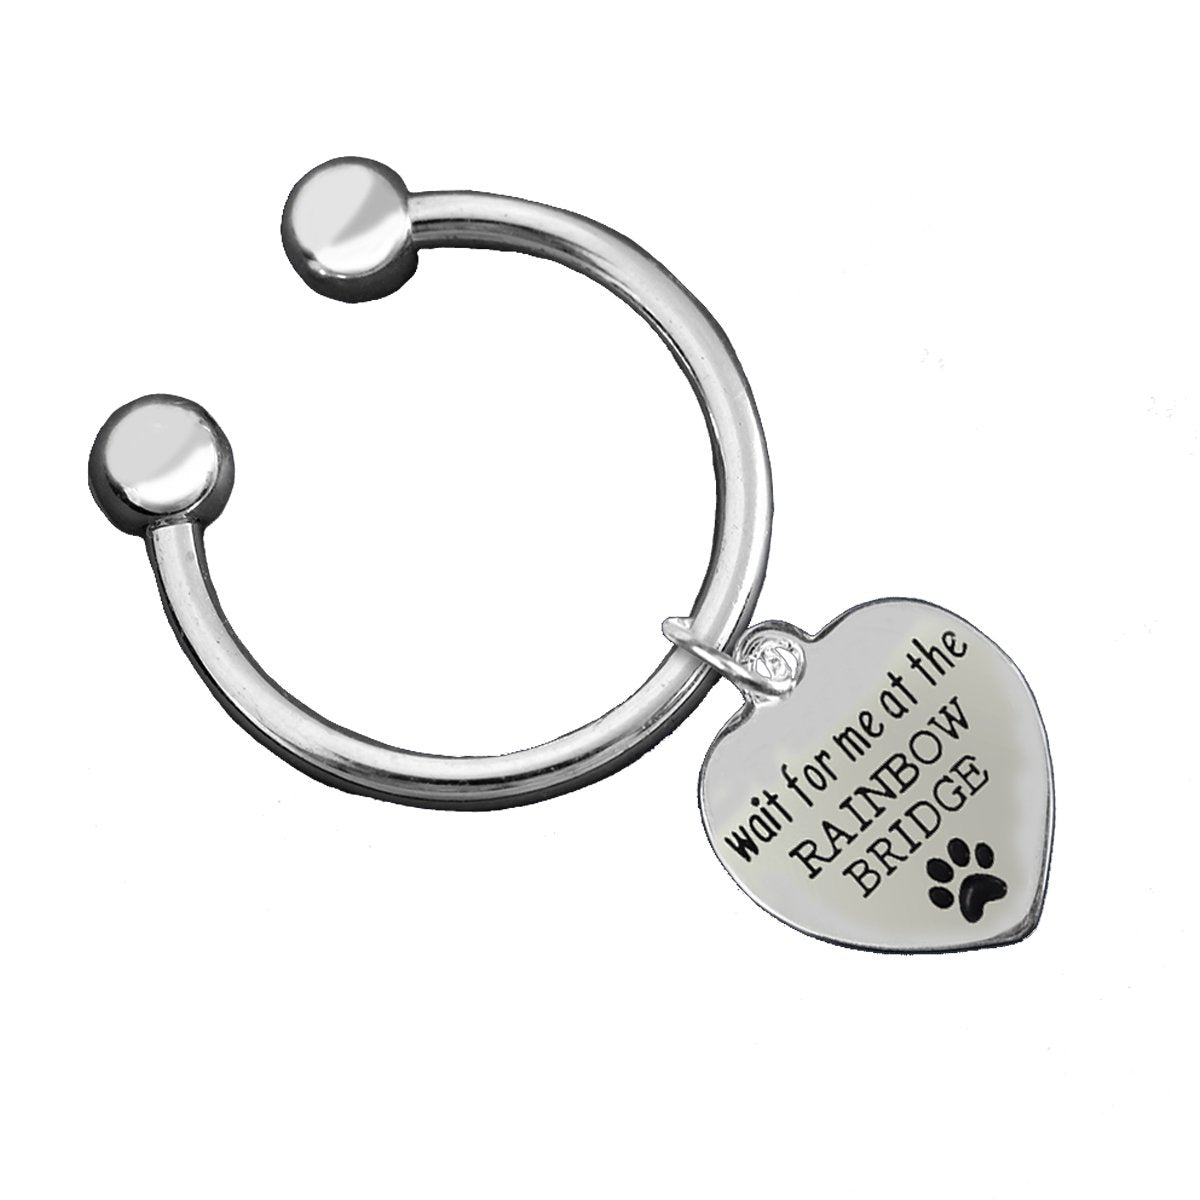 Wait For Me At The Rainbow Bridge Key Chains - Fundraising For A Cause